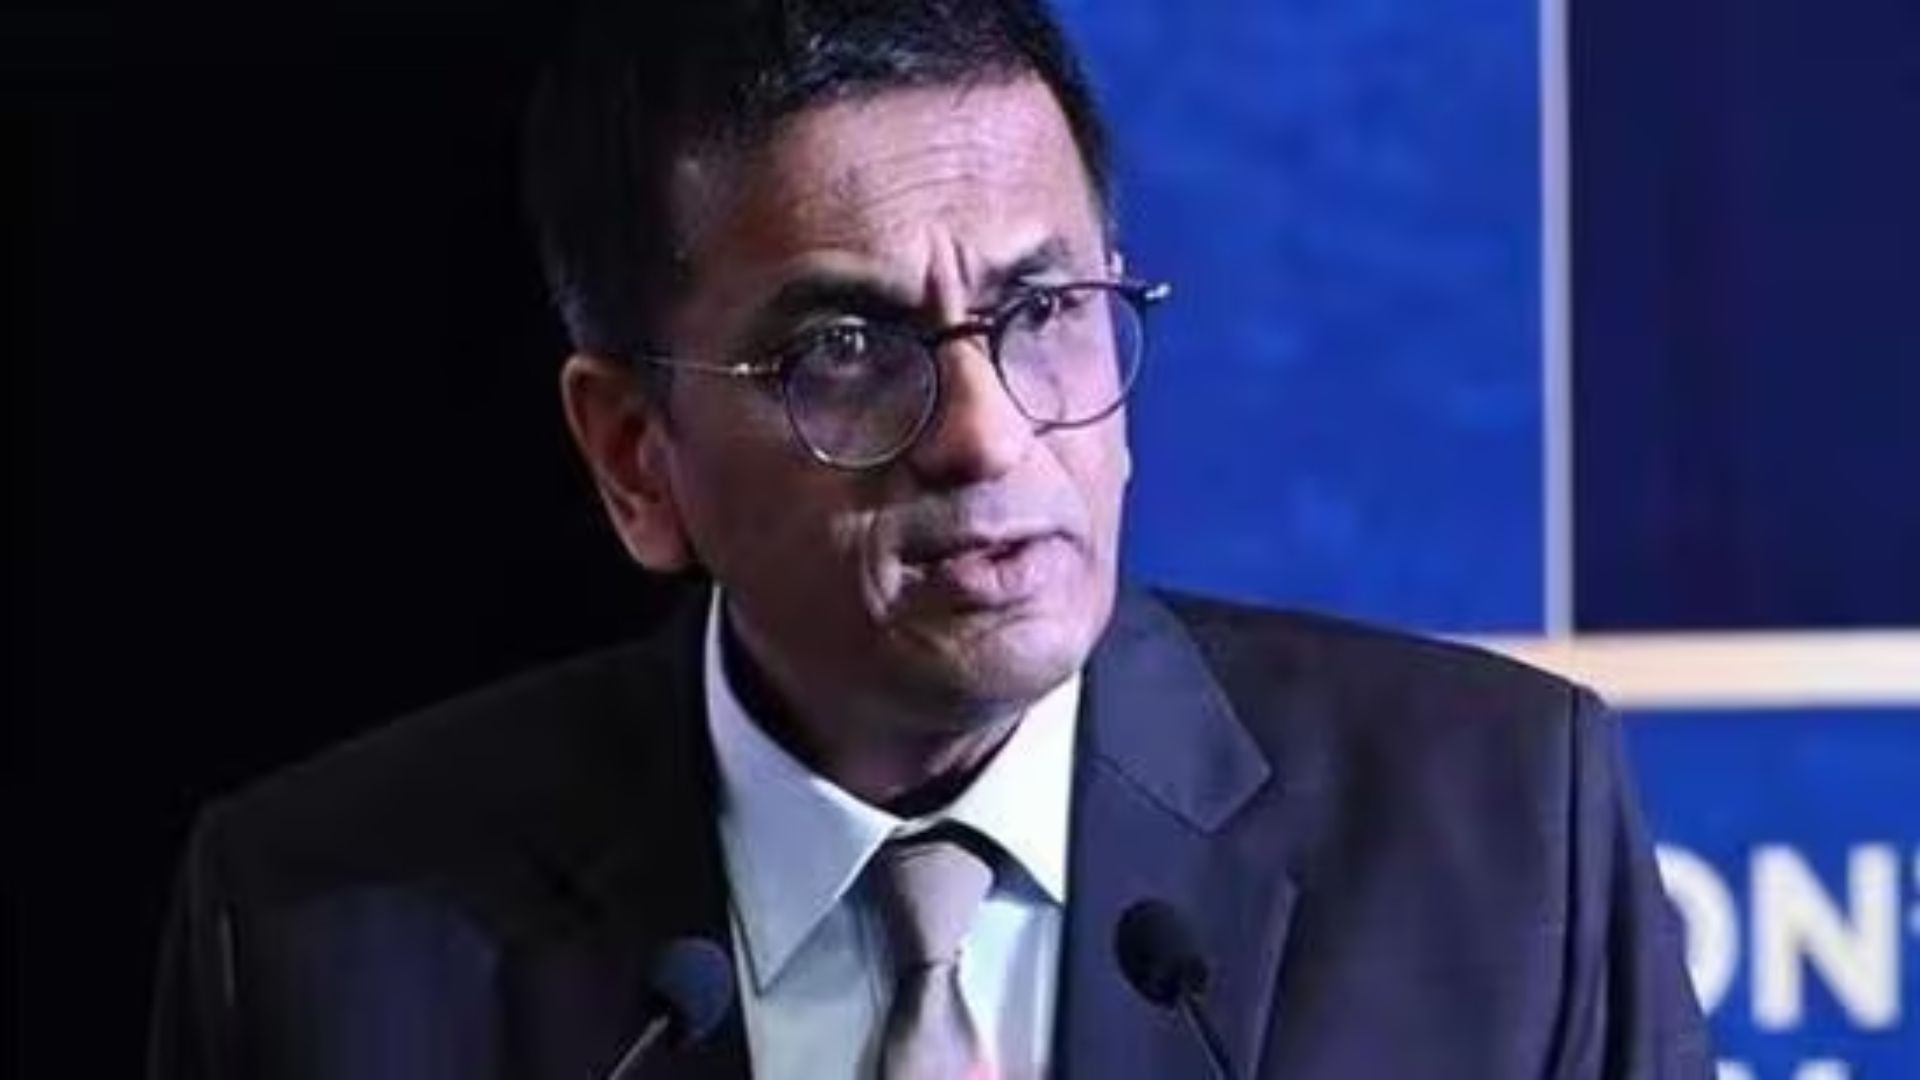 CJI Chandrachud welcomes and greets judges from overseas to Supreme Court